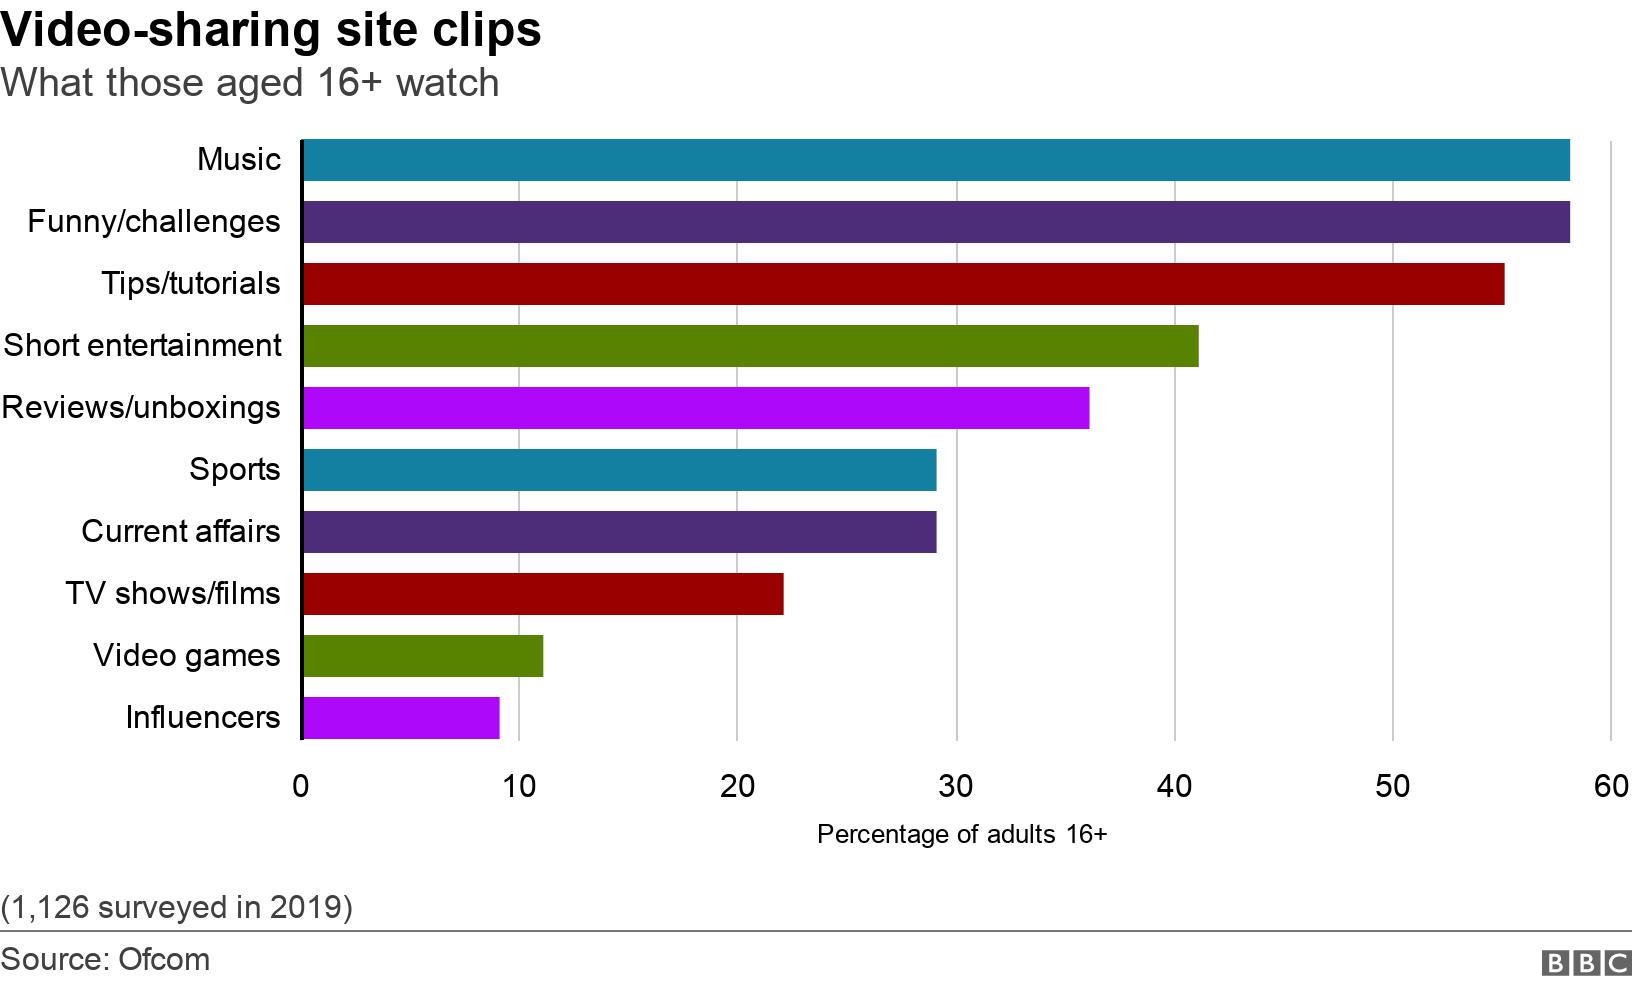 Video-sharing site clips. What those aged 16+ watch.  (1,126 surveyed in 2019).